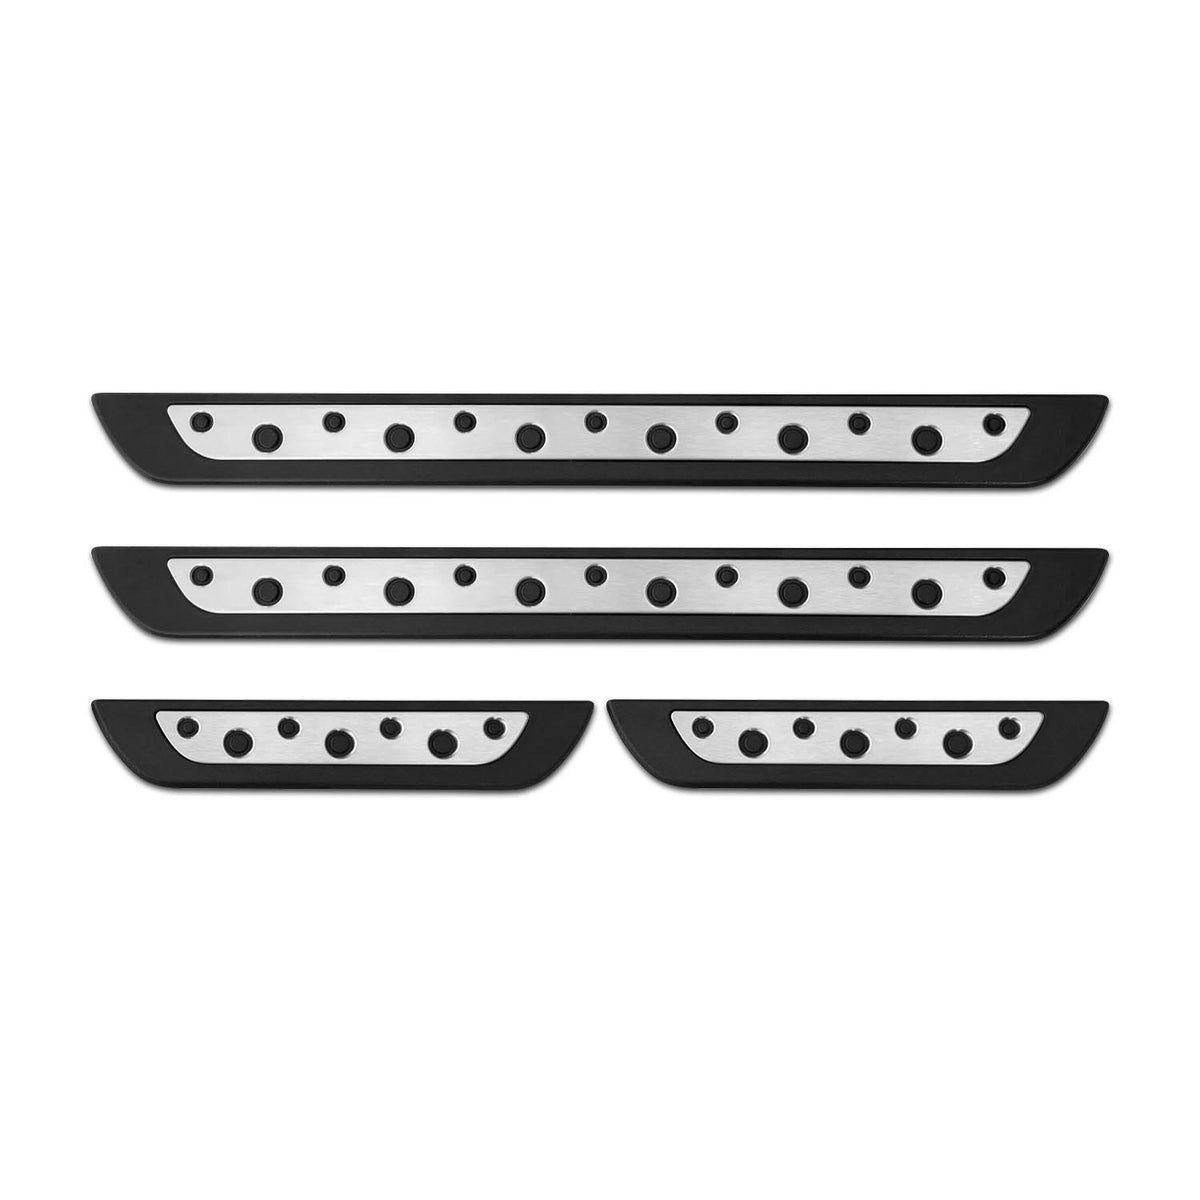 Door sill trims for Jeep Commander Compass stainless steel silver 4 pieces